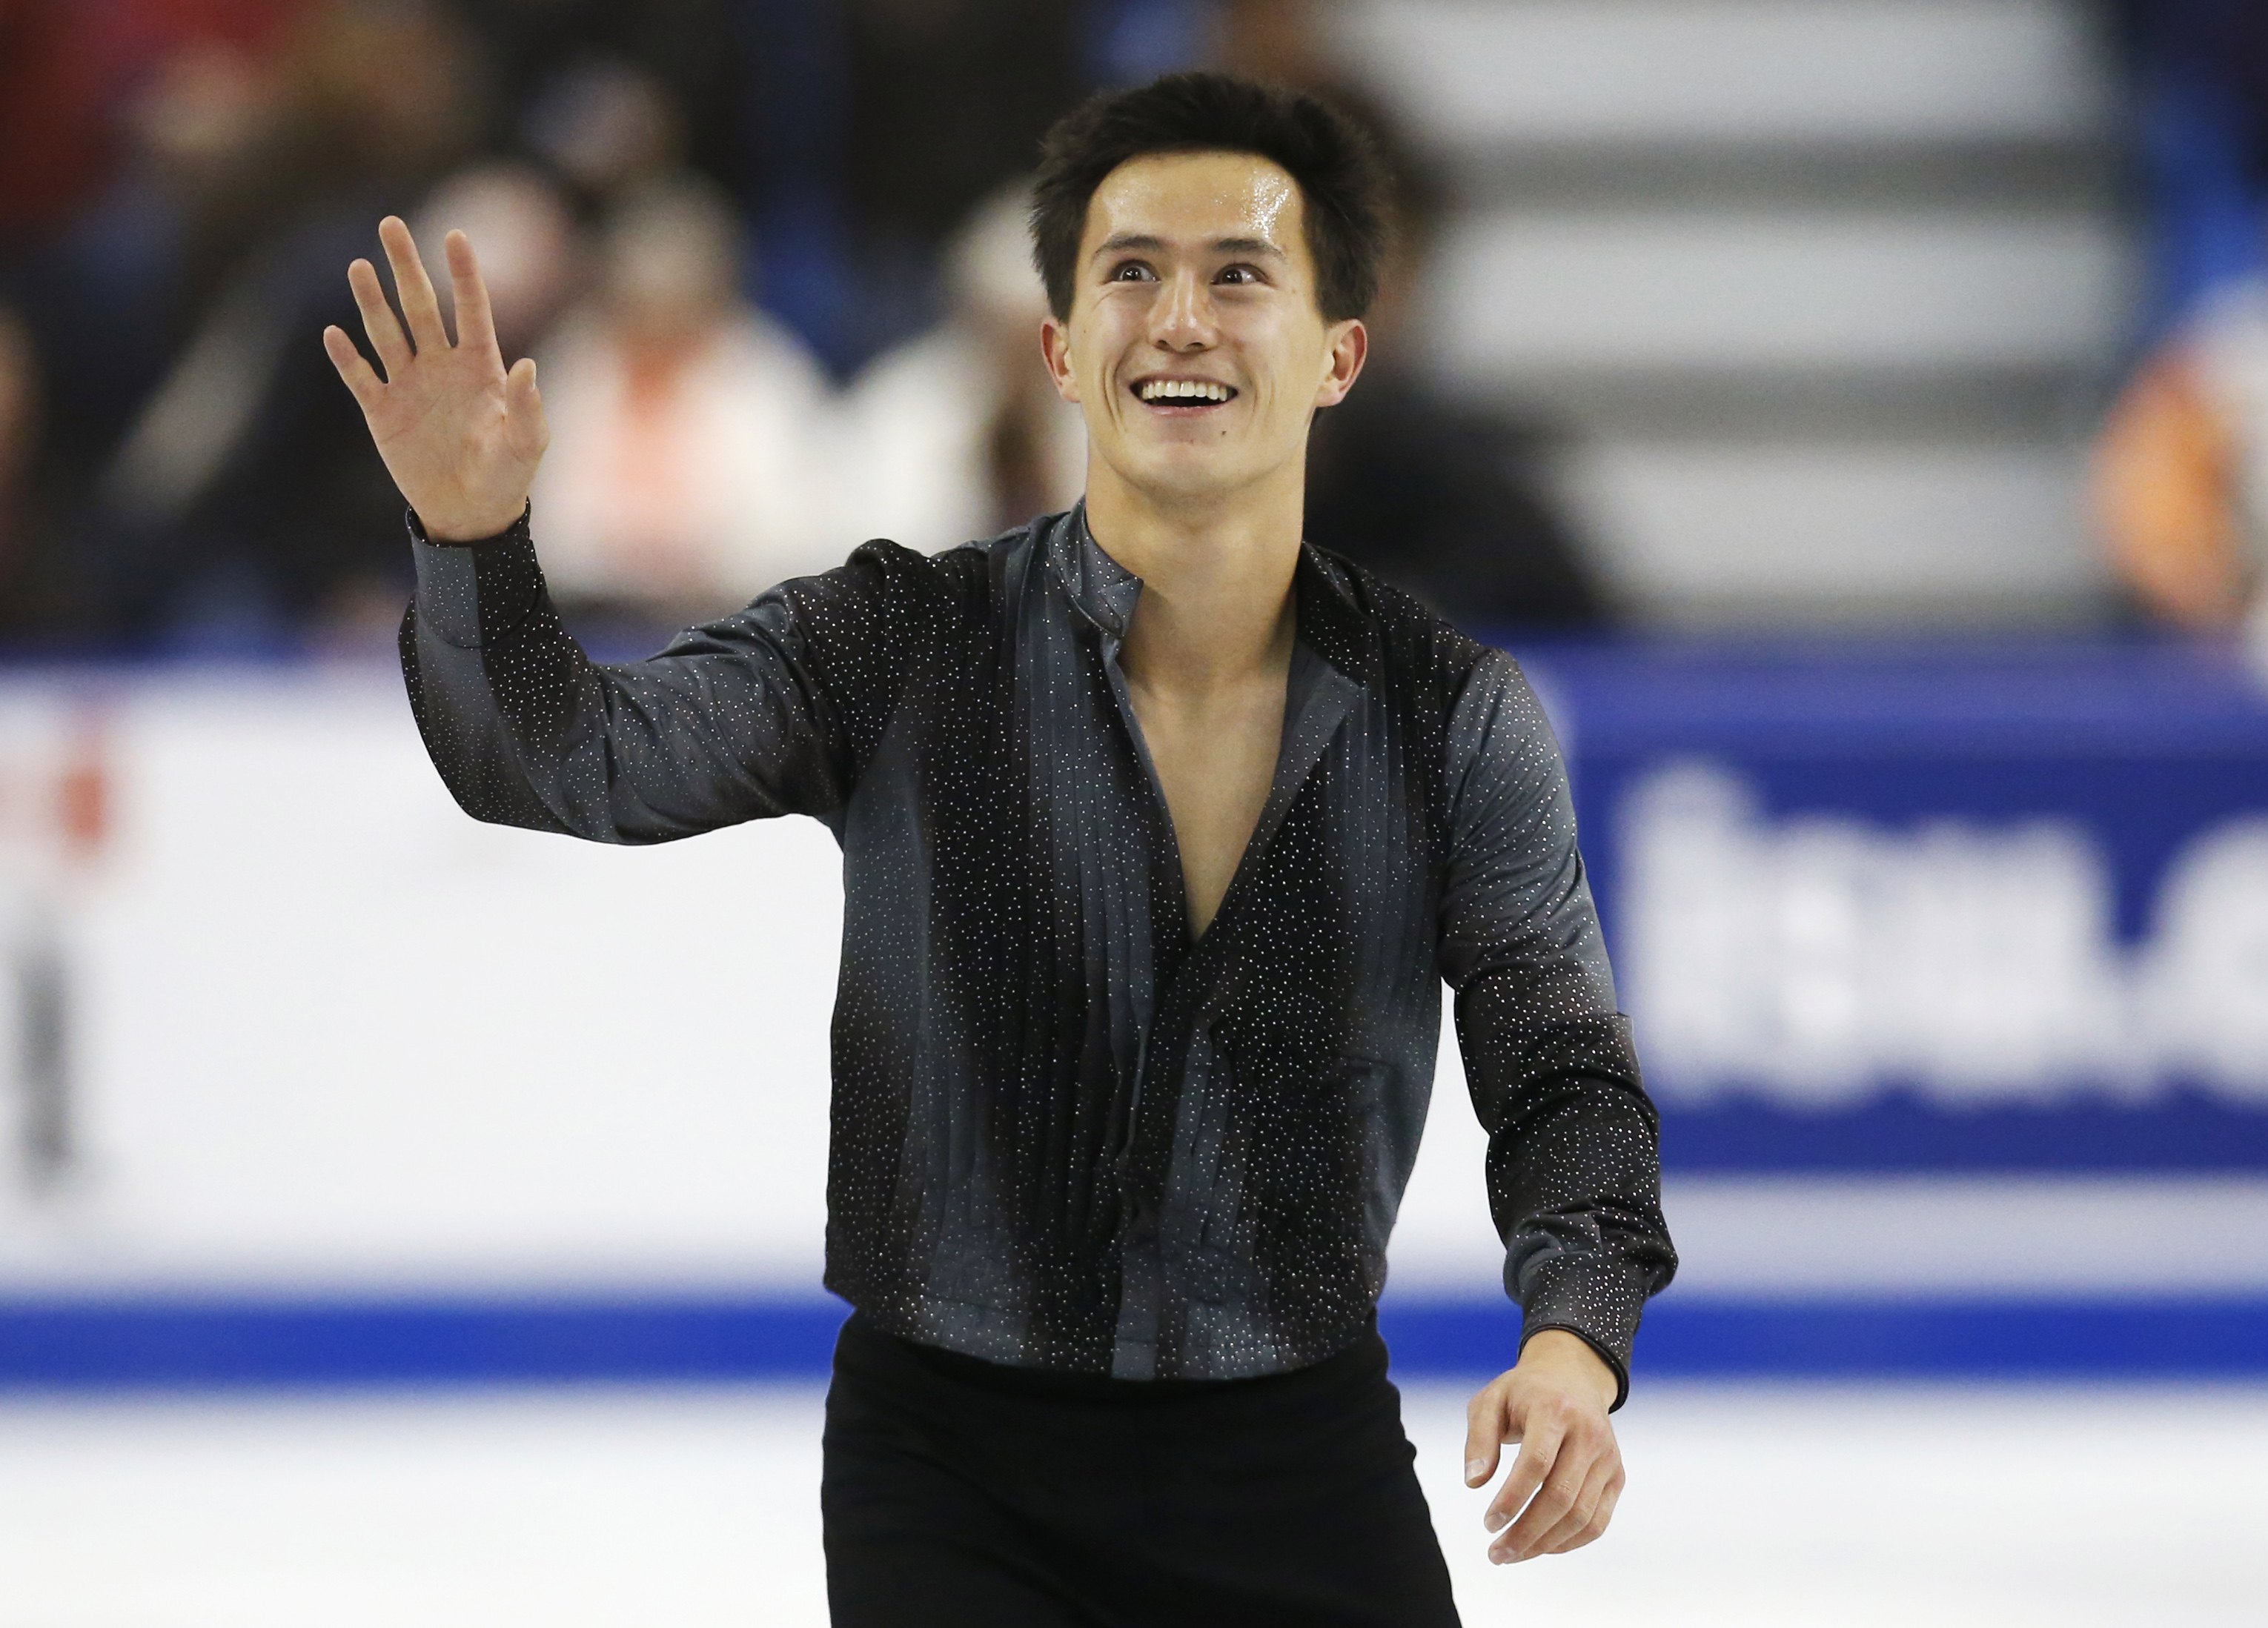 Chan reacts following his men's short program at the Skate Canada International figure skating competition in Saint John. Photo: Reuters